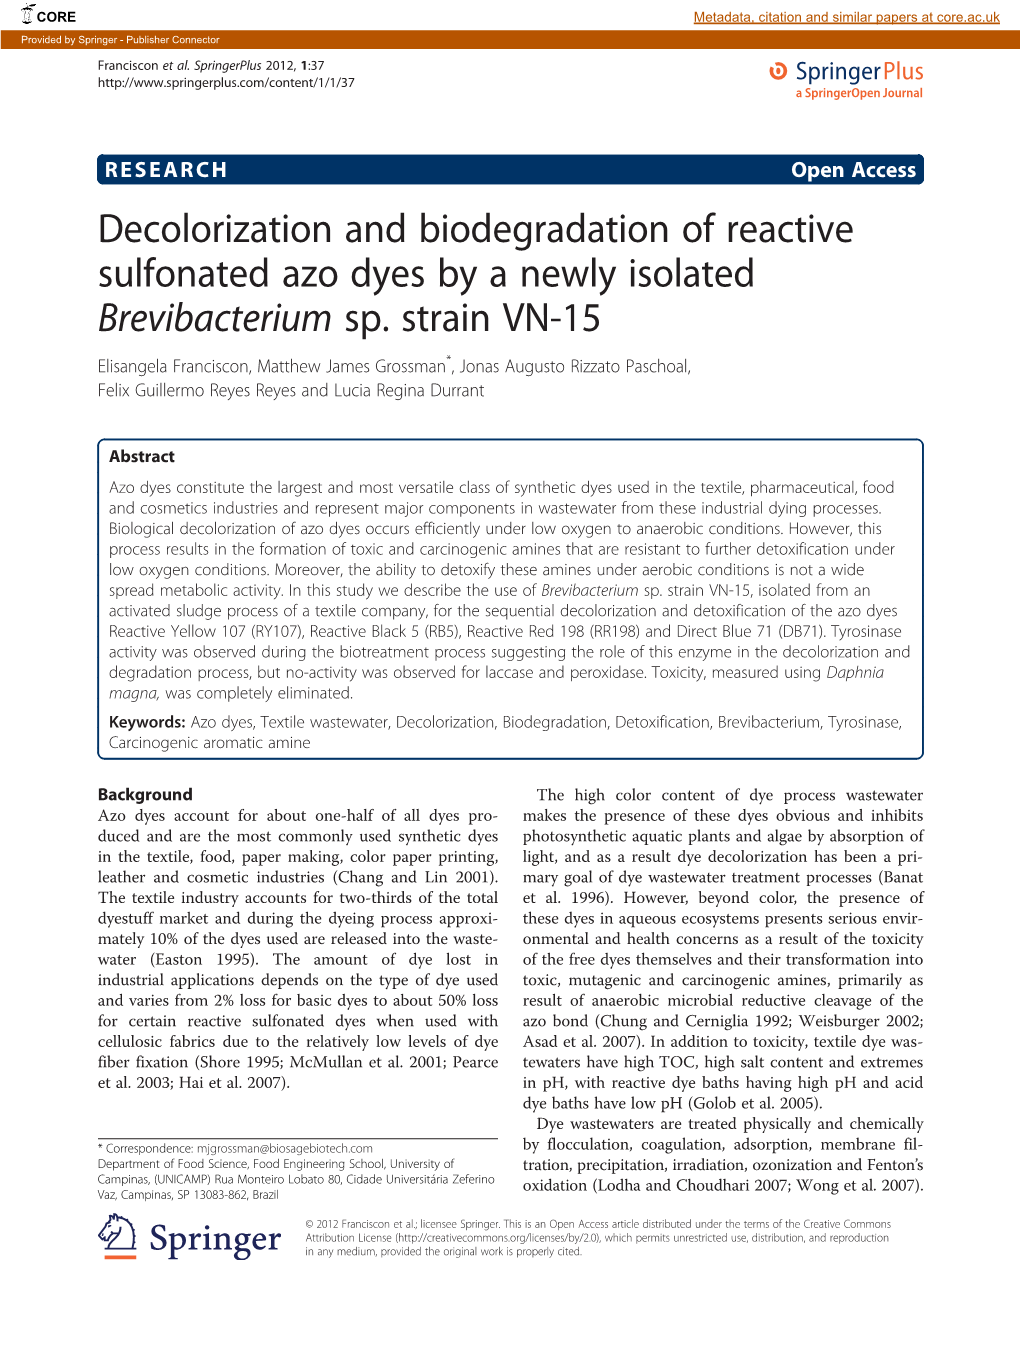 Decolorization and Biodegradation of Reactive Sulfonated Azo Dyes by a Newly Isolated Brevibacterium Sp